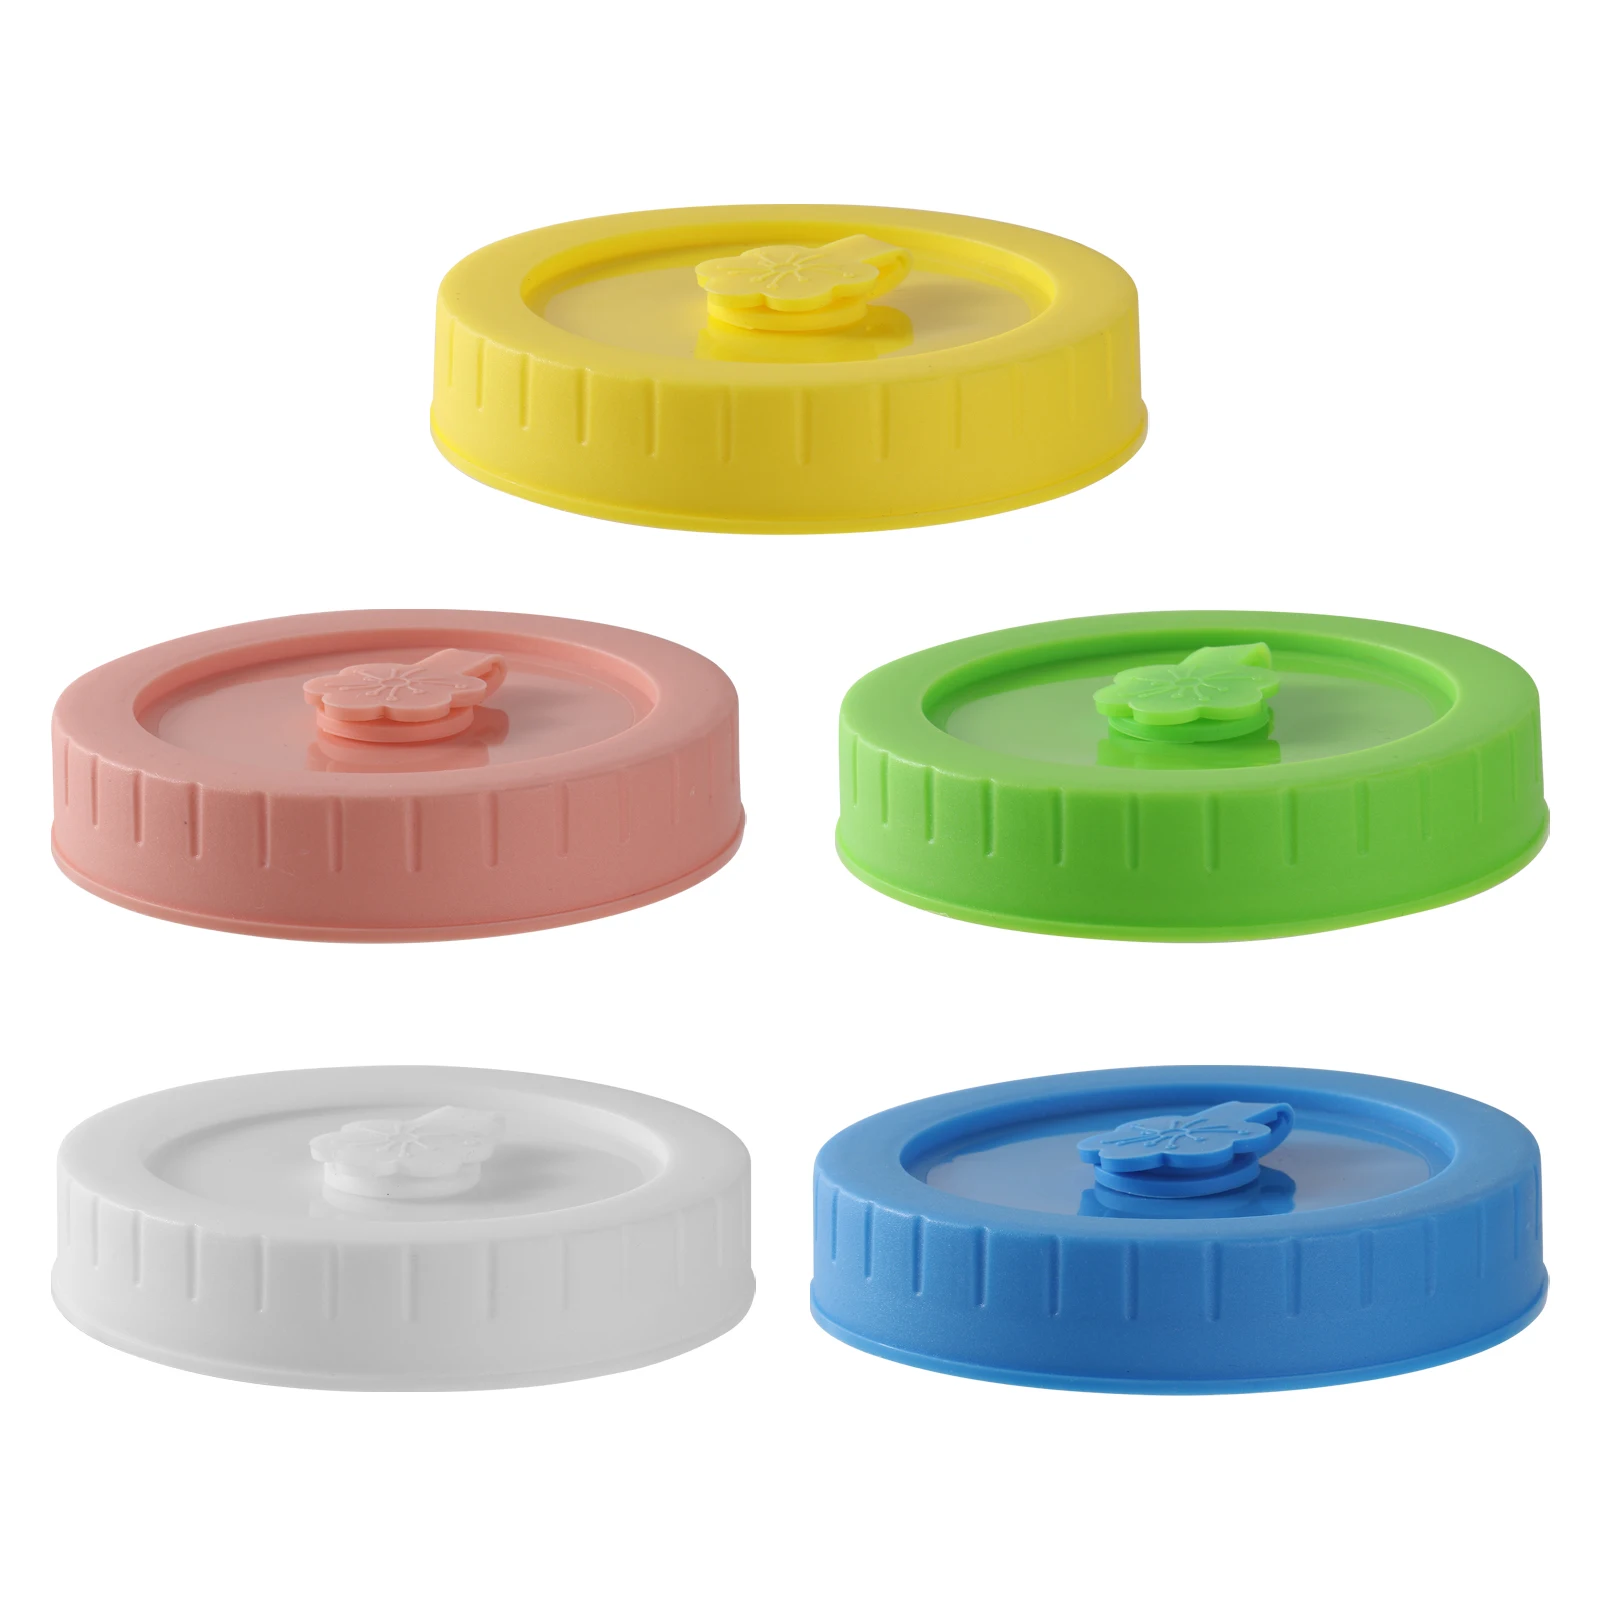 5Pcs 86mm Plastic Straw Lids Mason Canning Jar Covers with Straw Hole Plum-Shaped Silicone Stopper Glass Bottle Jar Storage Caps images - 6